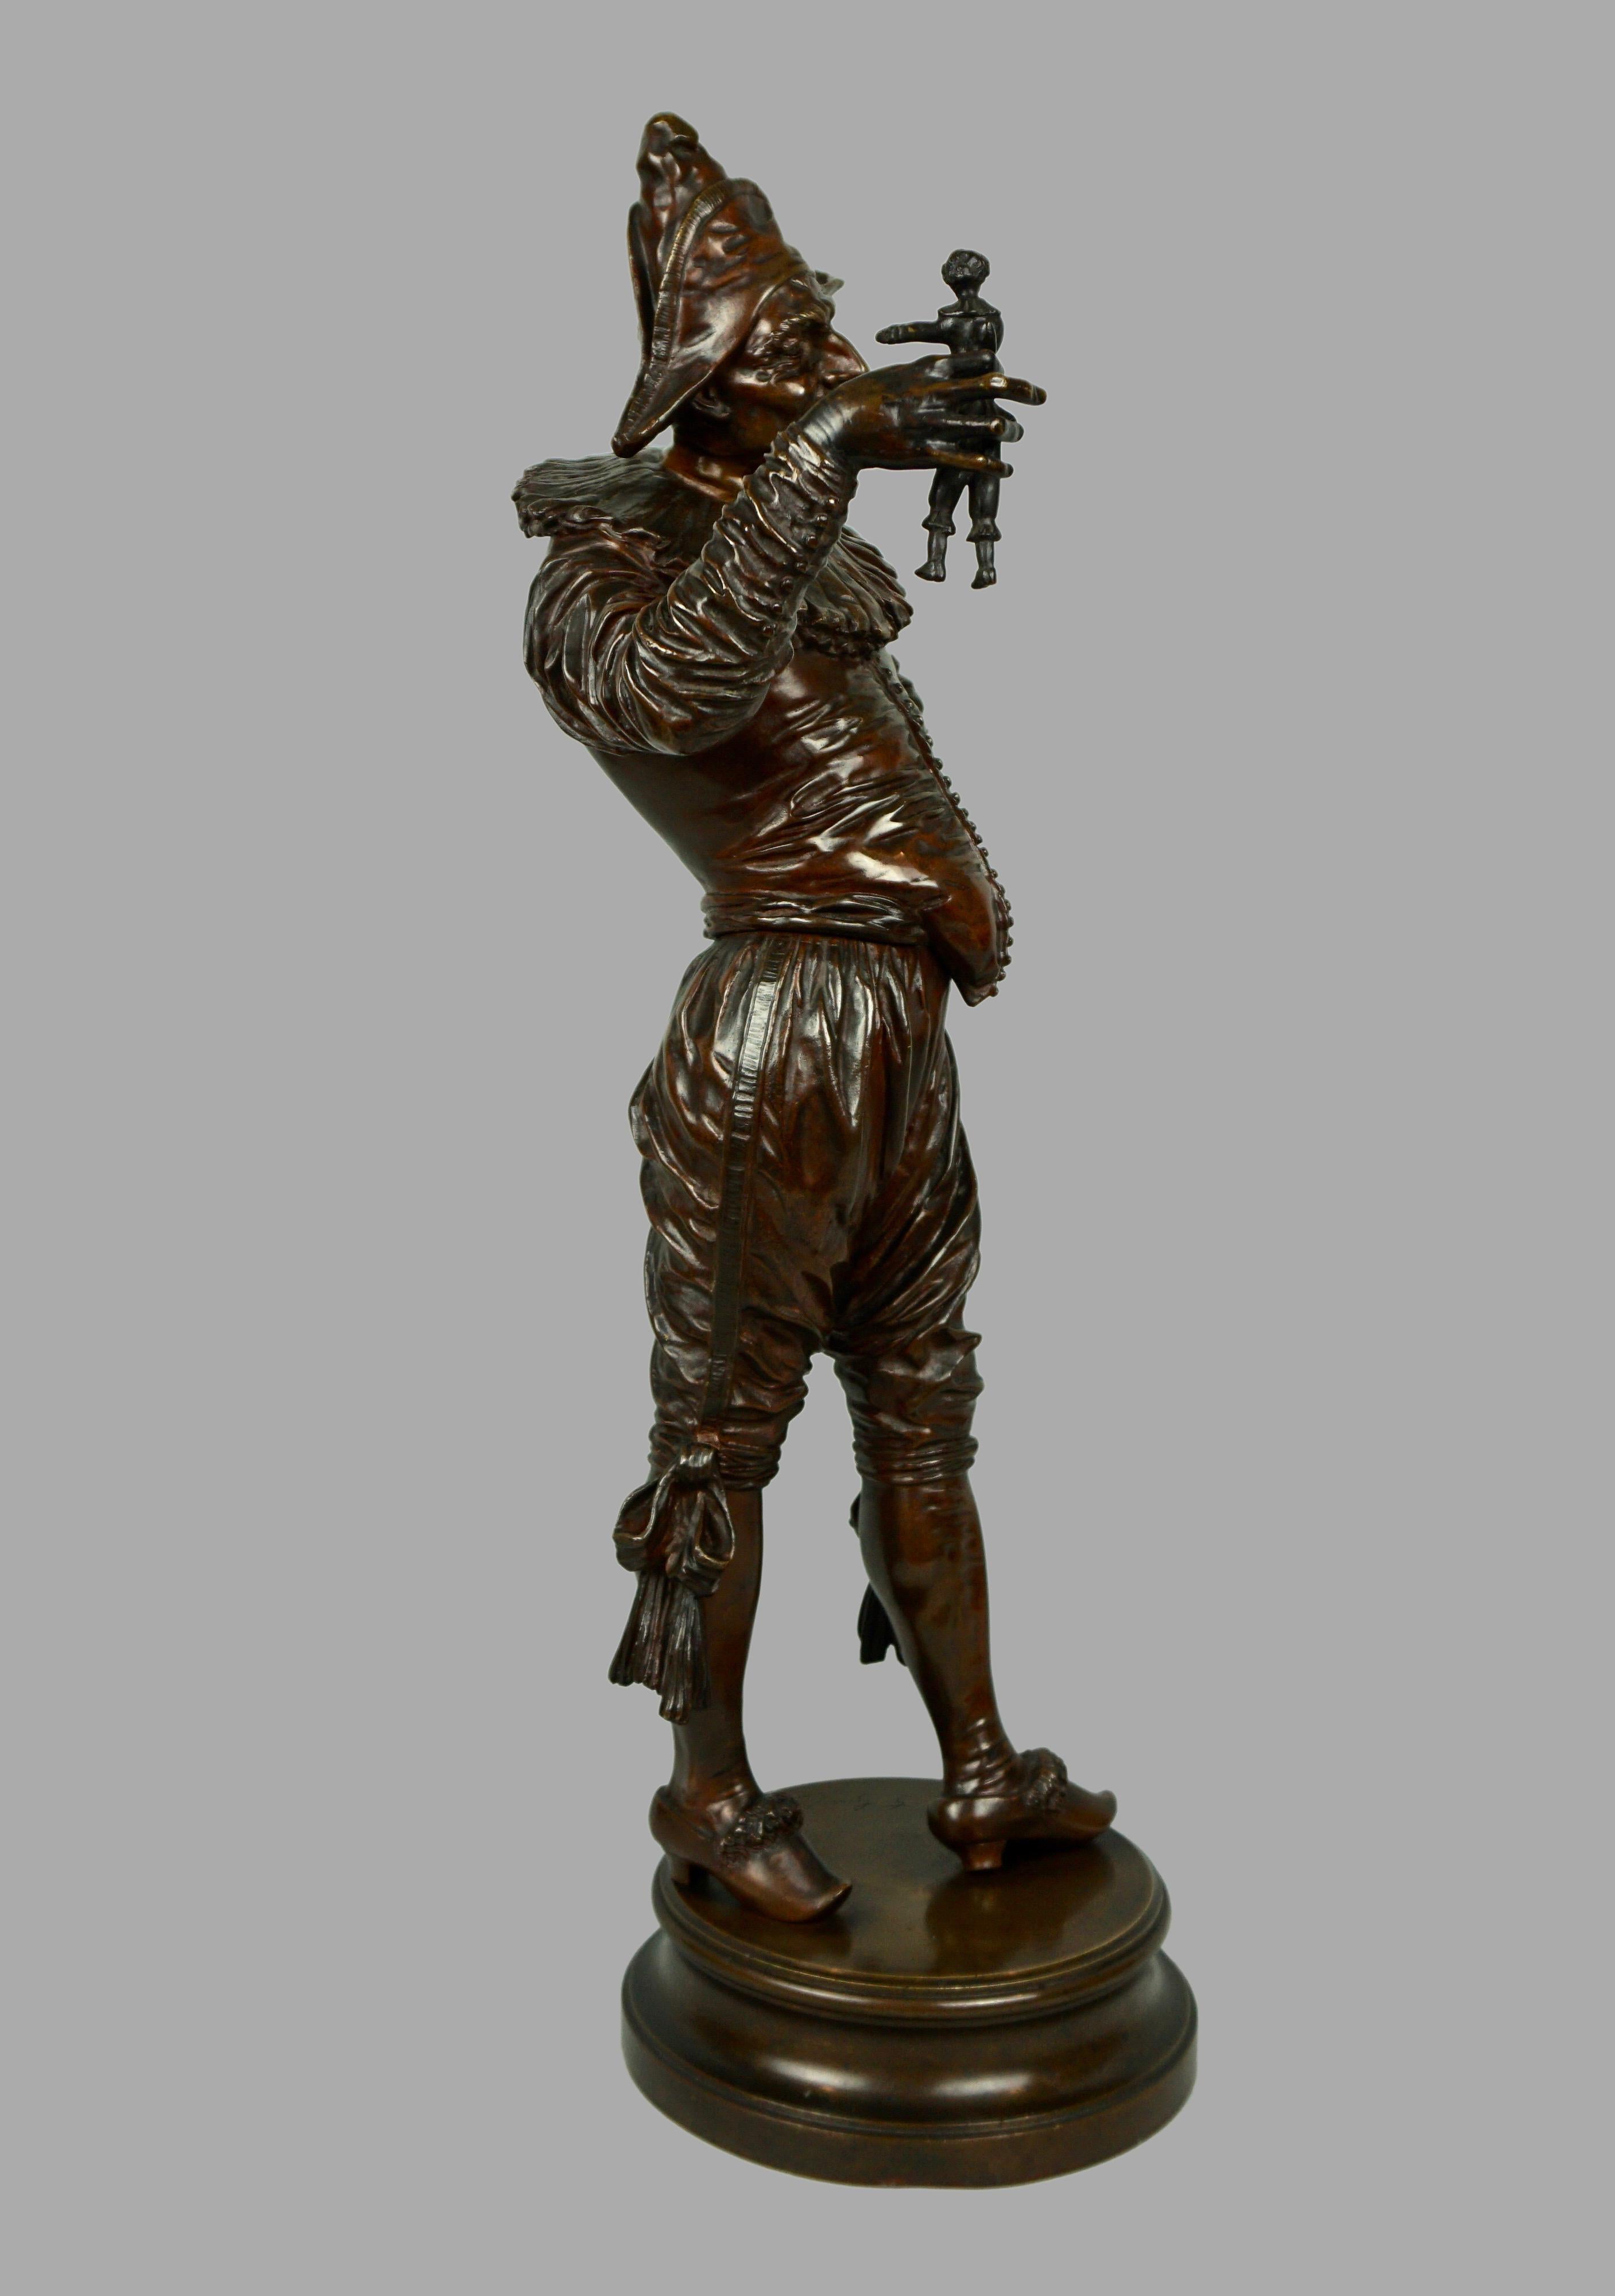 An exceptionally well-cast bronze sculpture with brown patina depicting a harlequin holding a doll, the elaborately dressed figure with an expressive face and imposing posture resting on a bronze circular base signed 